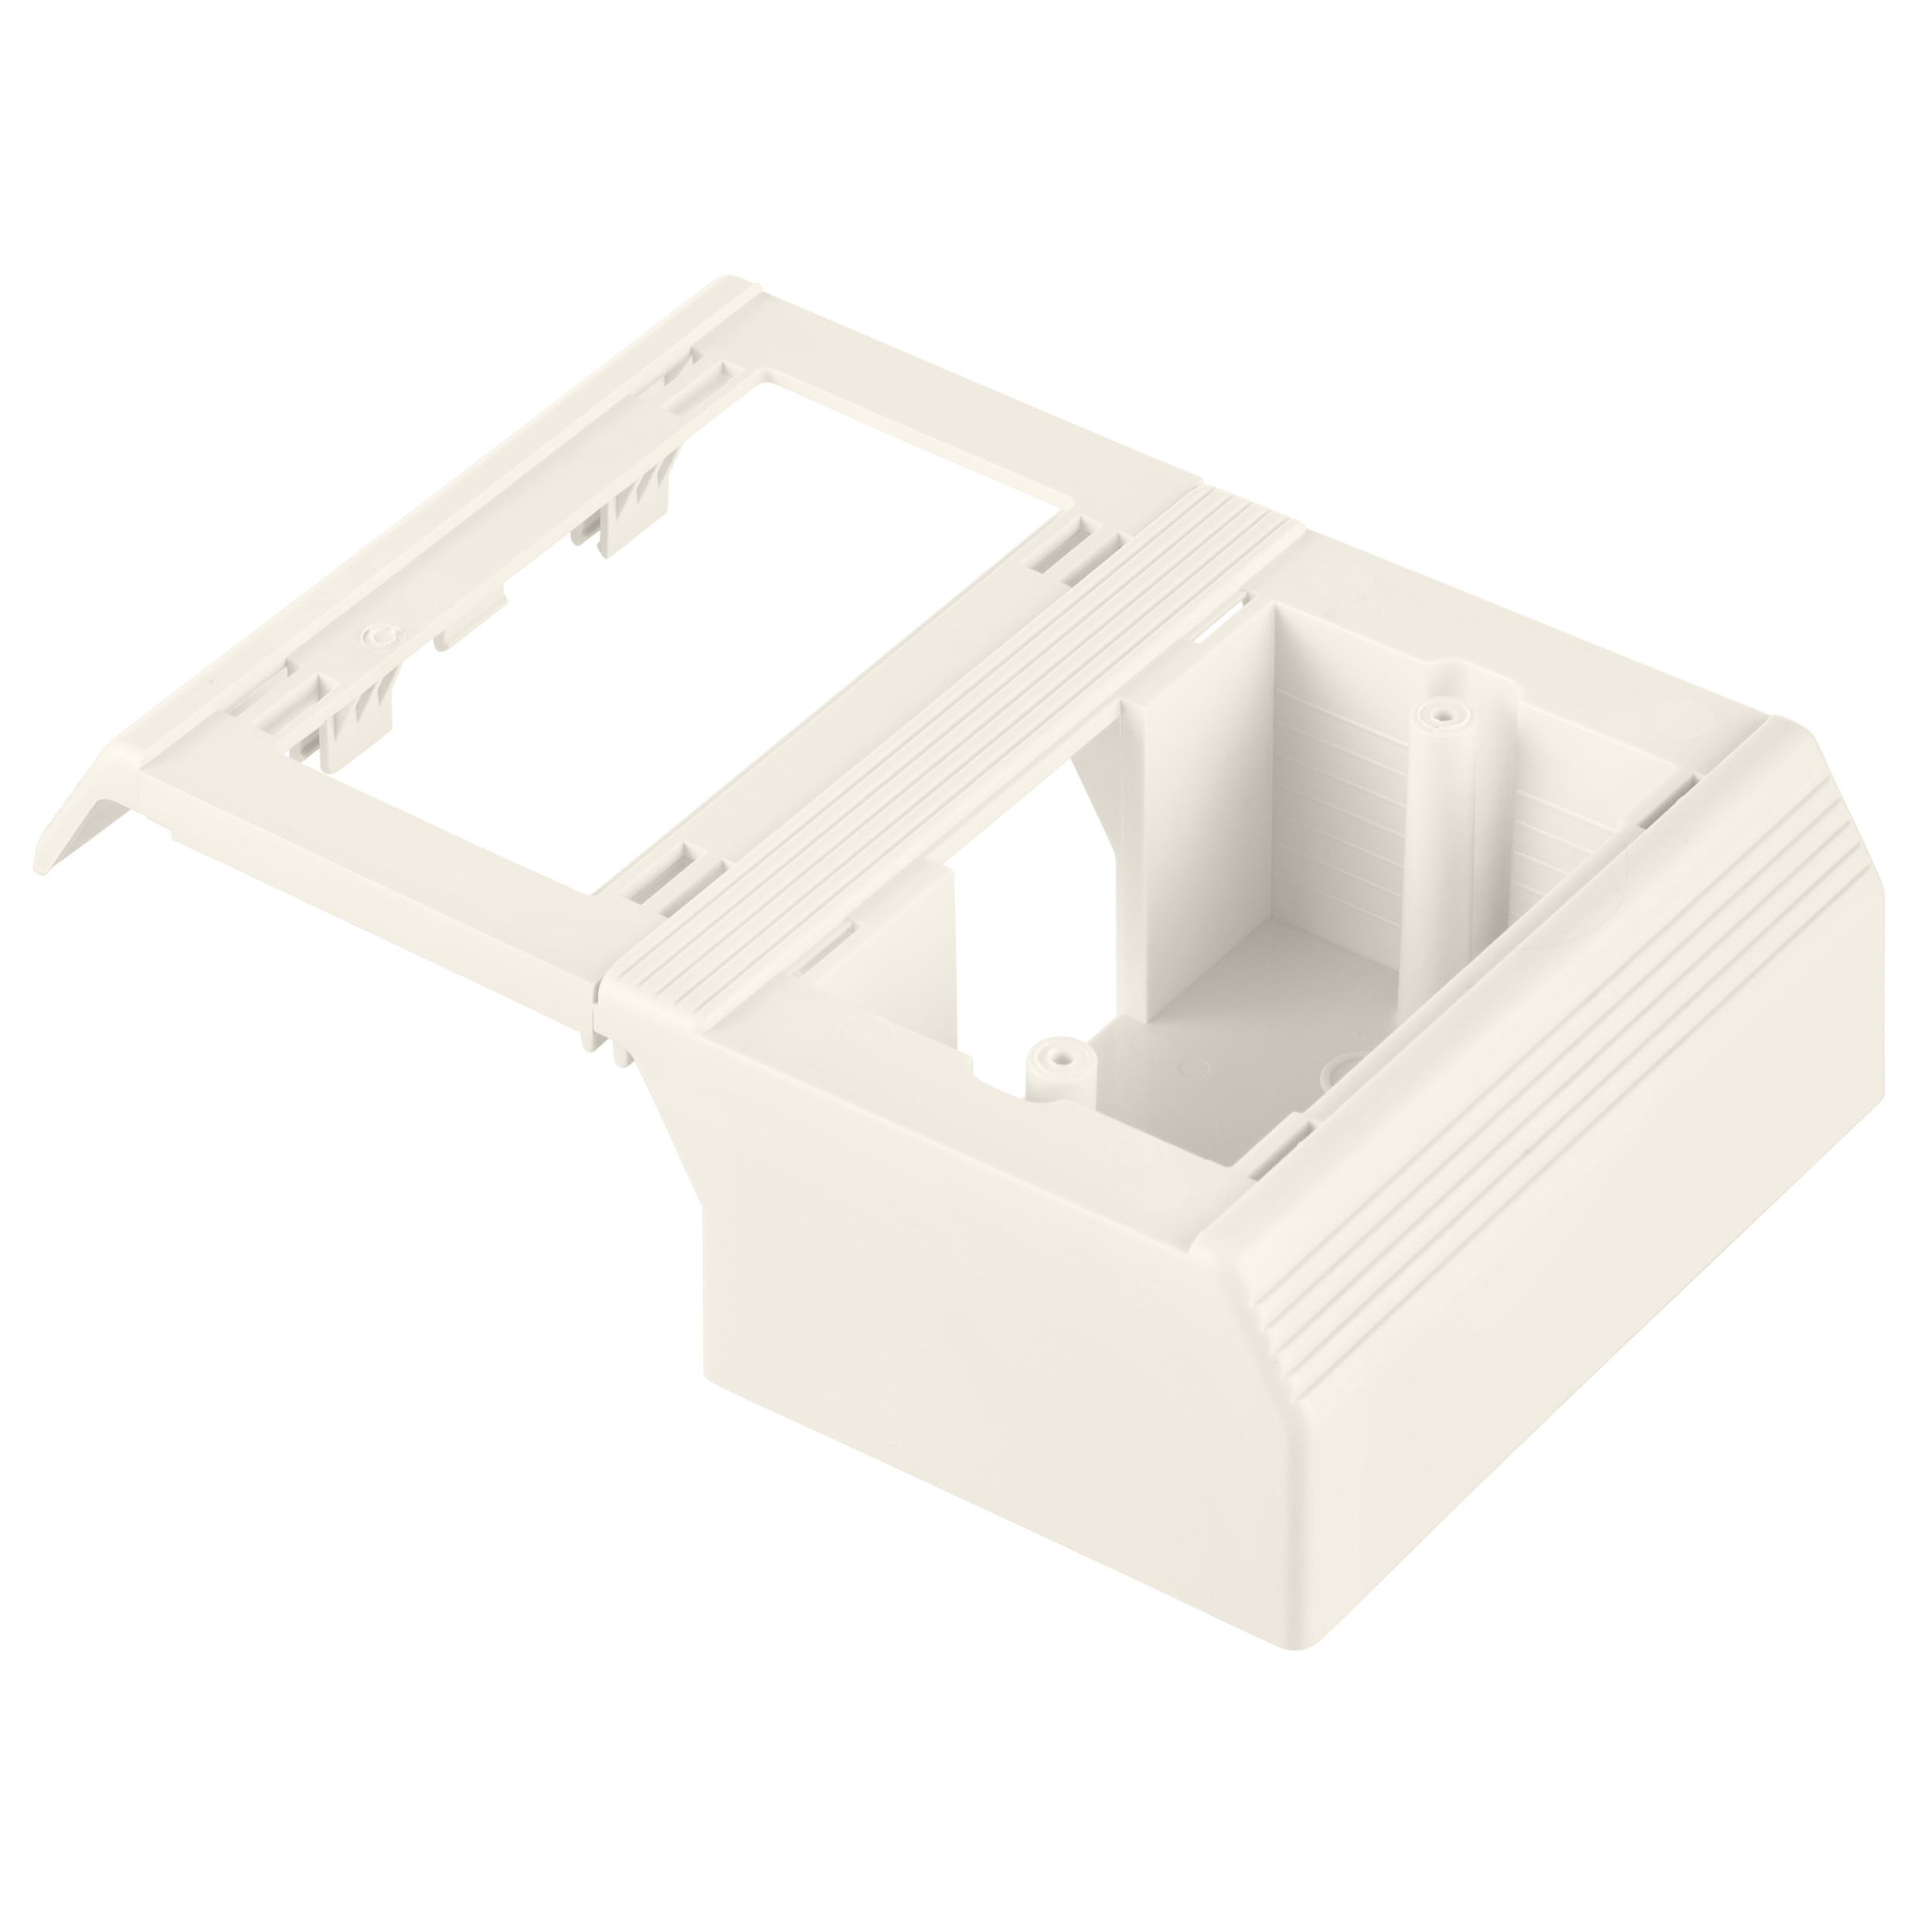 Surface Raceway, T-70 Offset Box, for Snap-on Faceplates, White